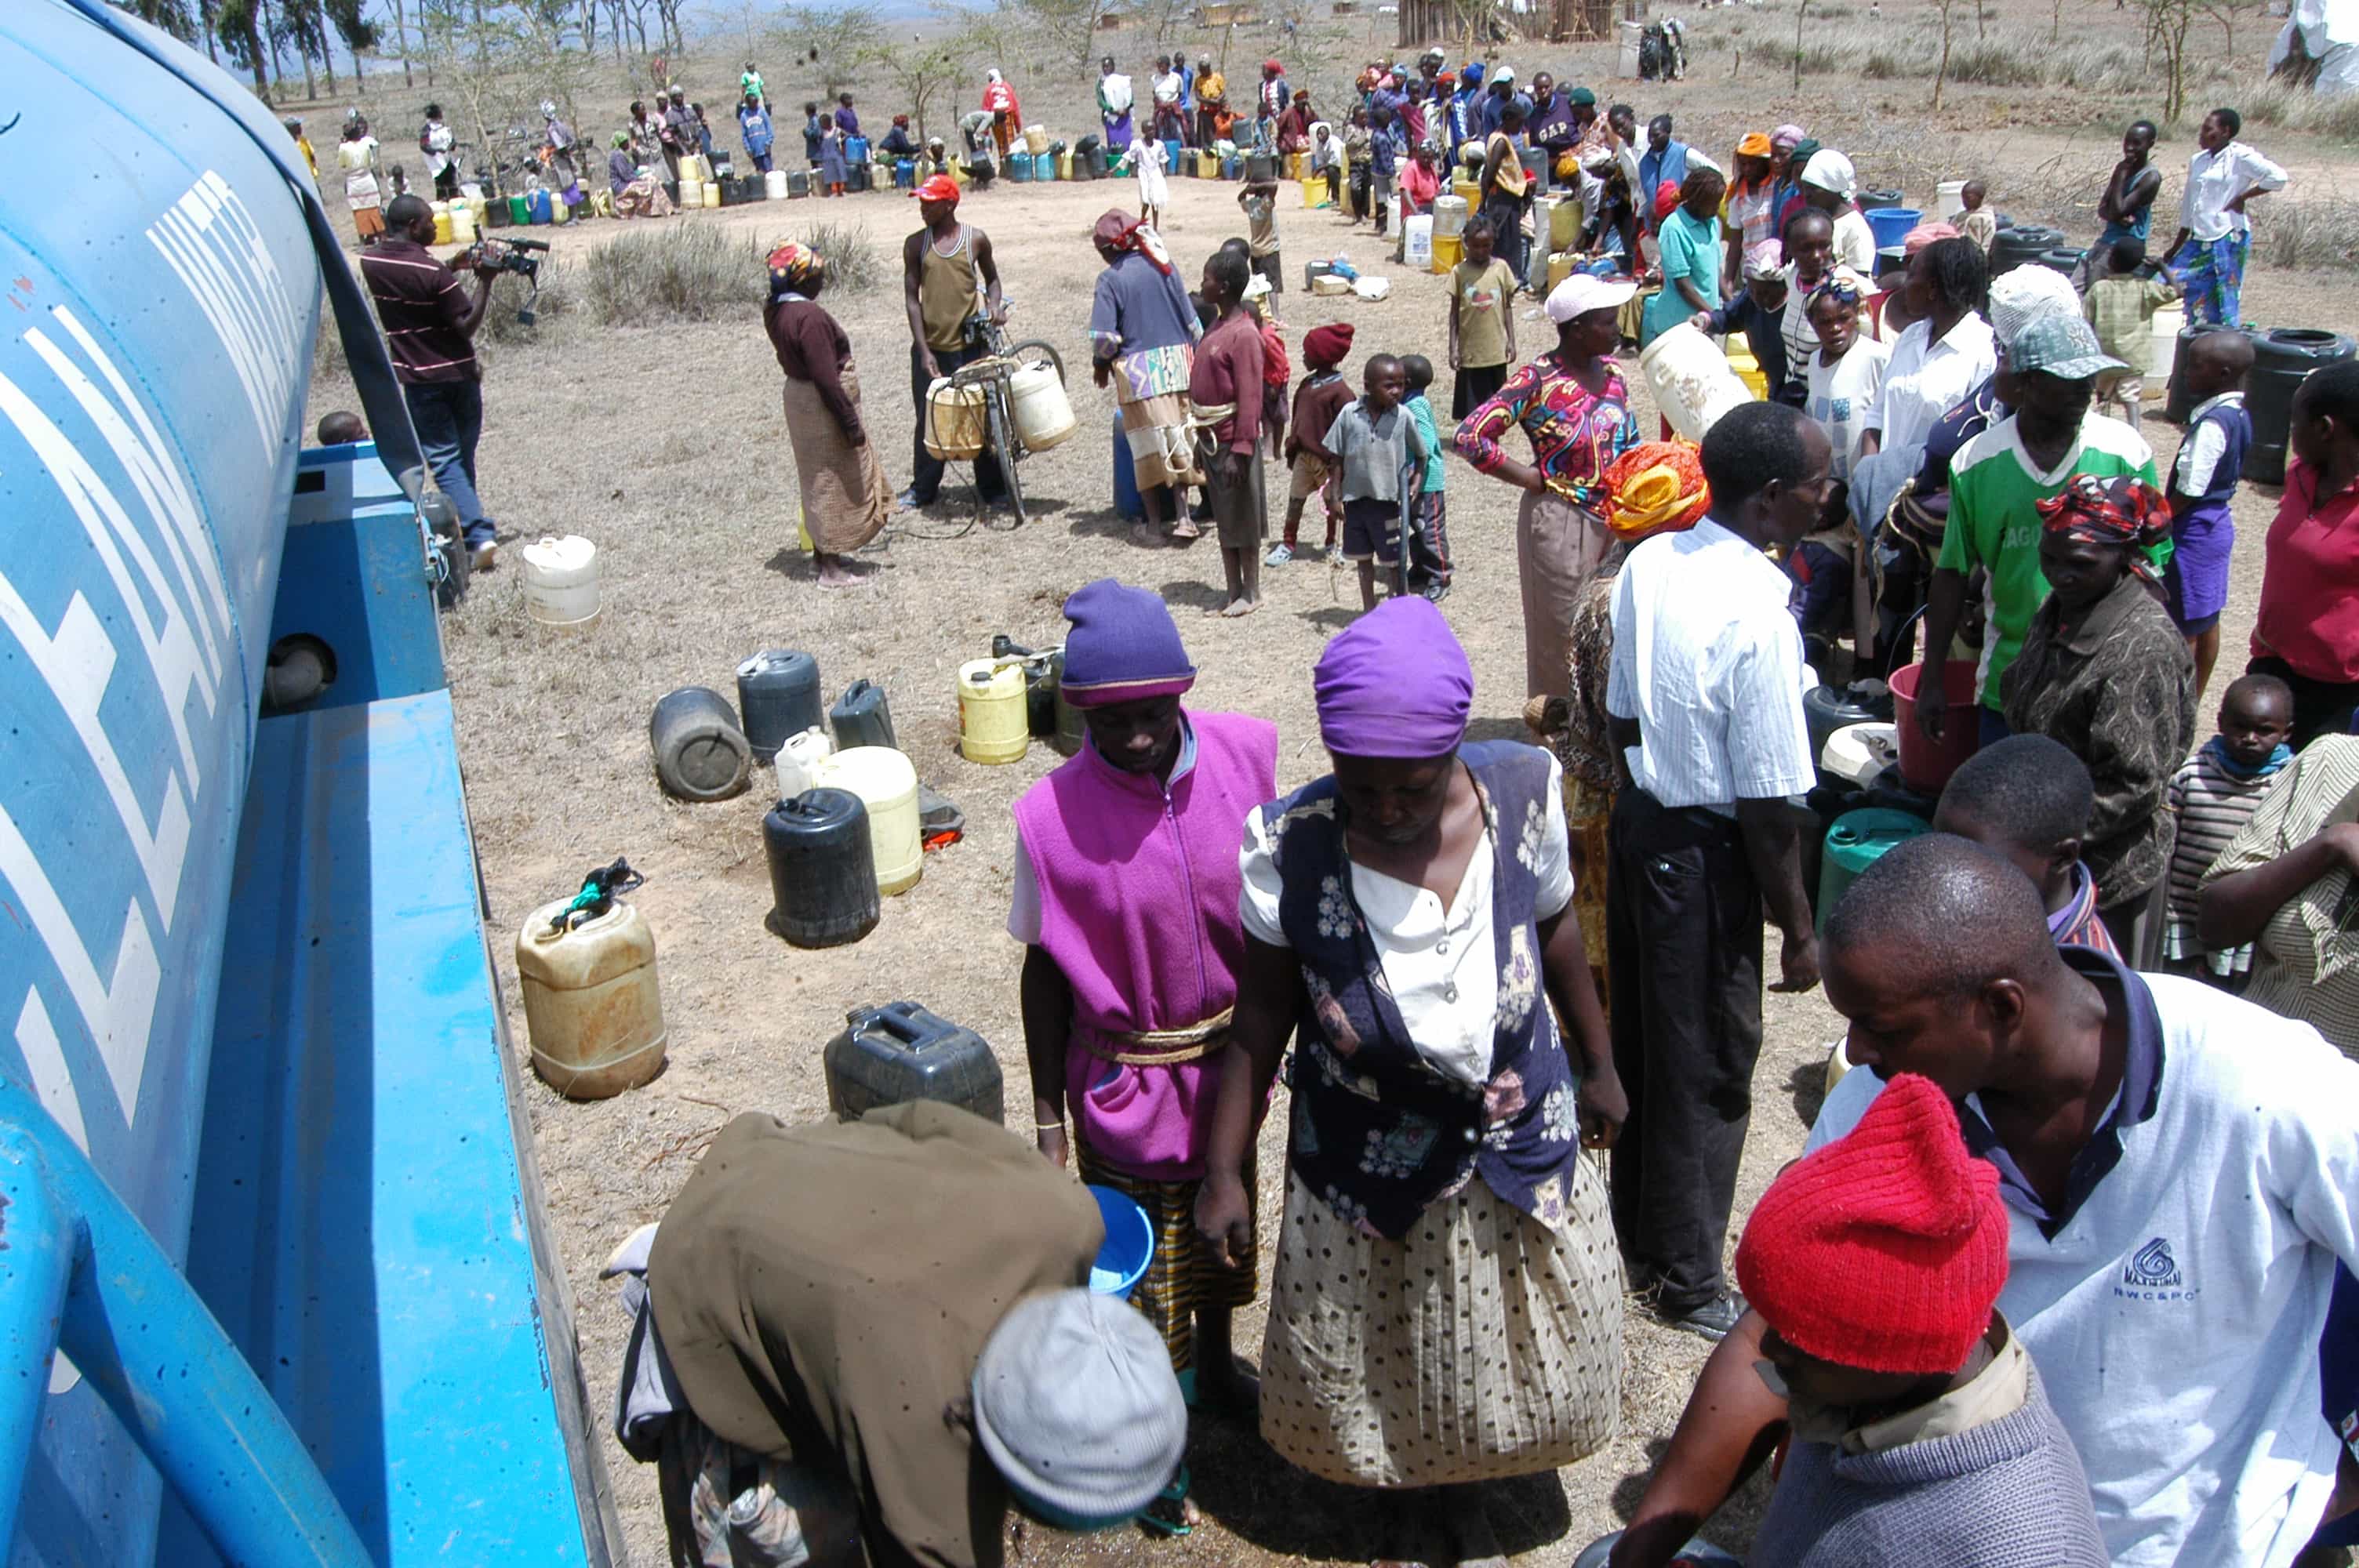 People queue to fill up their containers at a water station in Nairobi., JOE MWANGI/Demotix